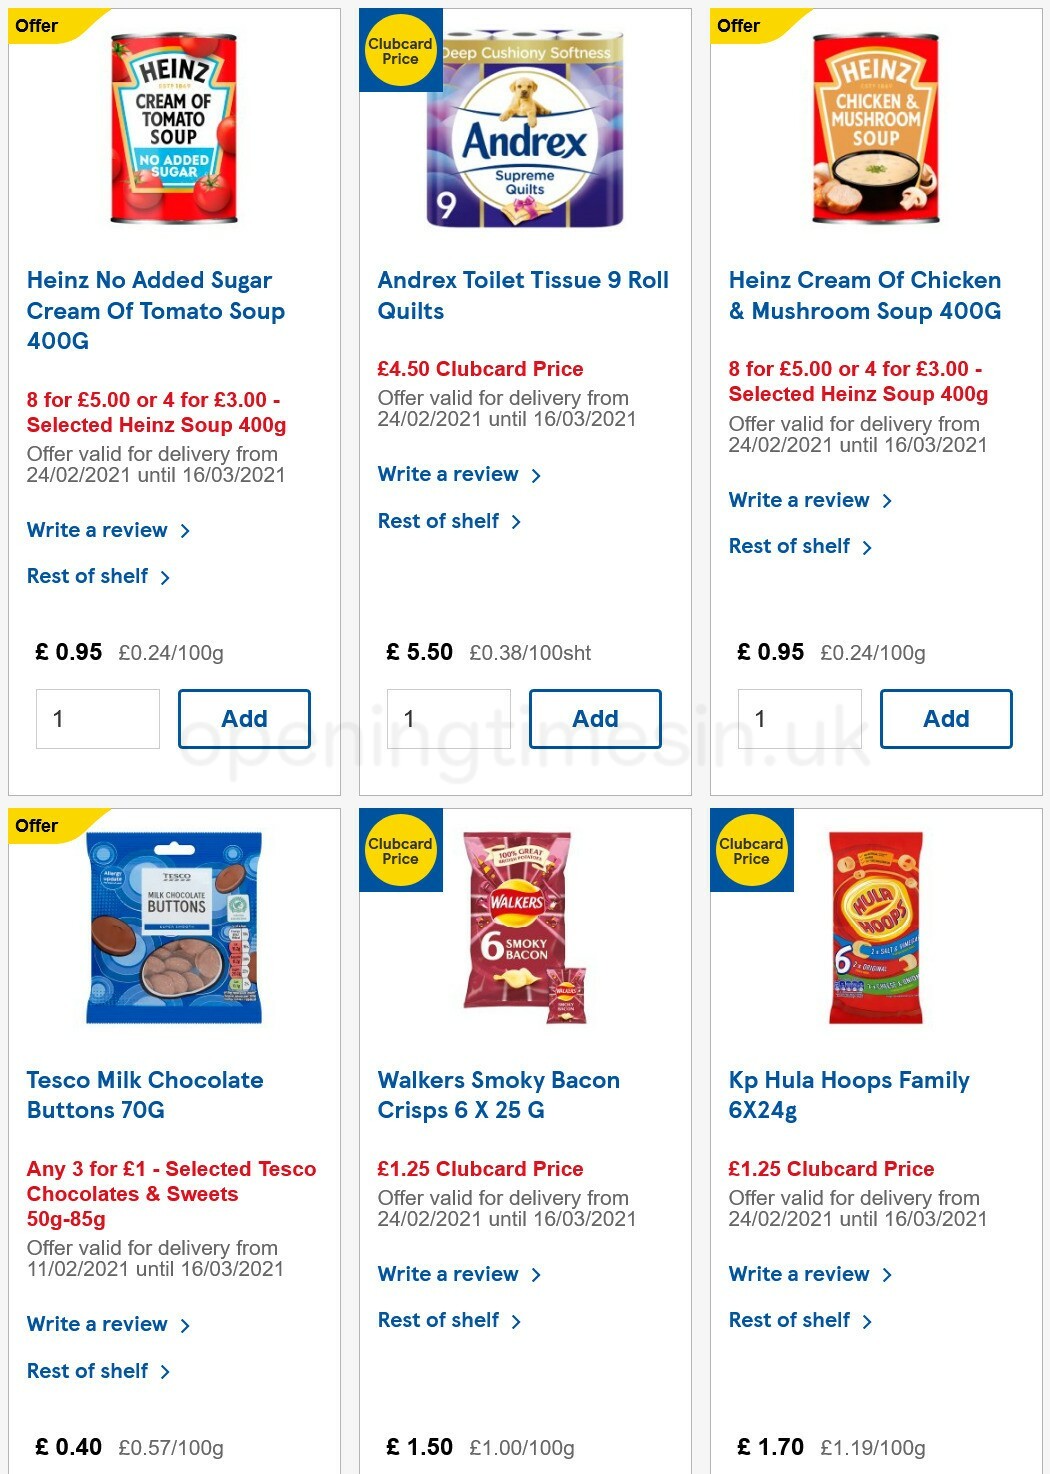 TESCO Offers from 10 March